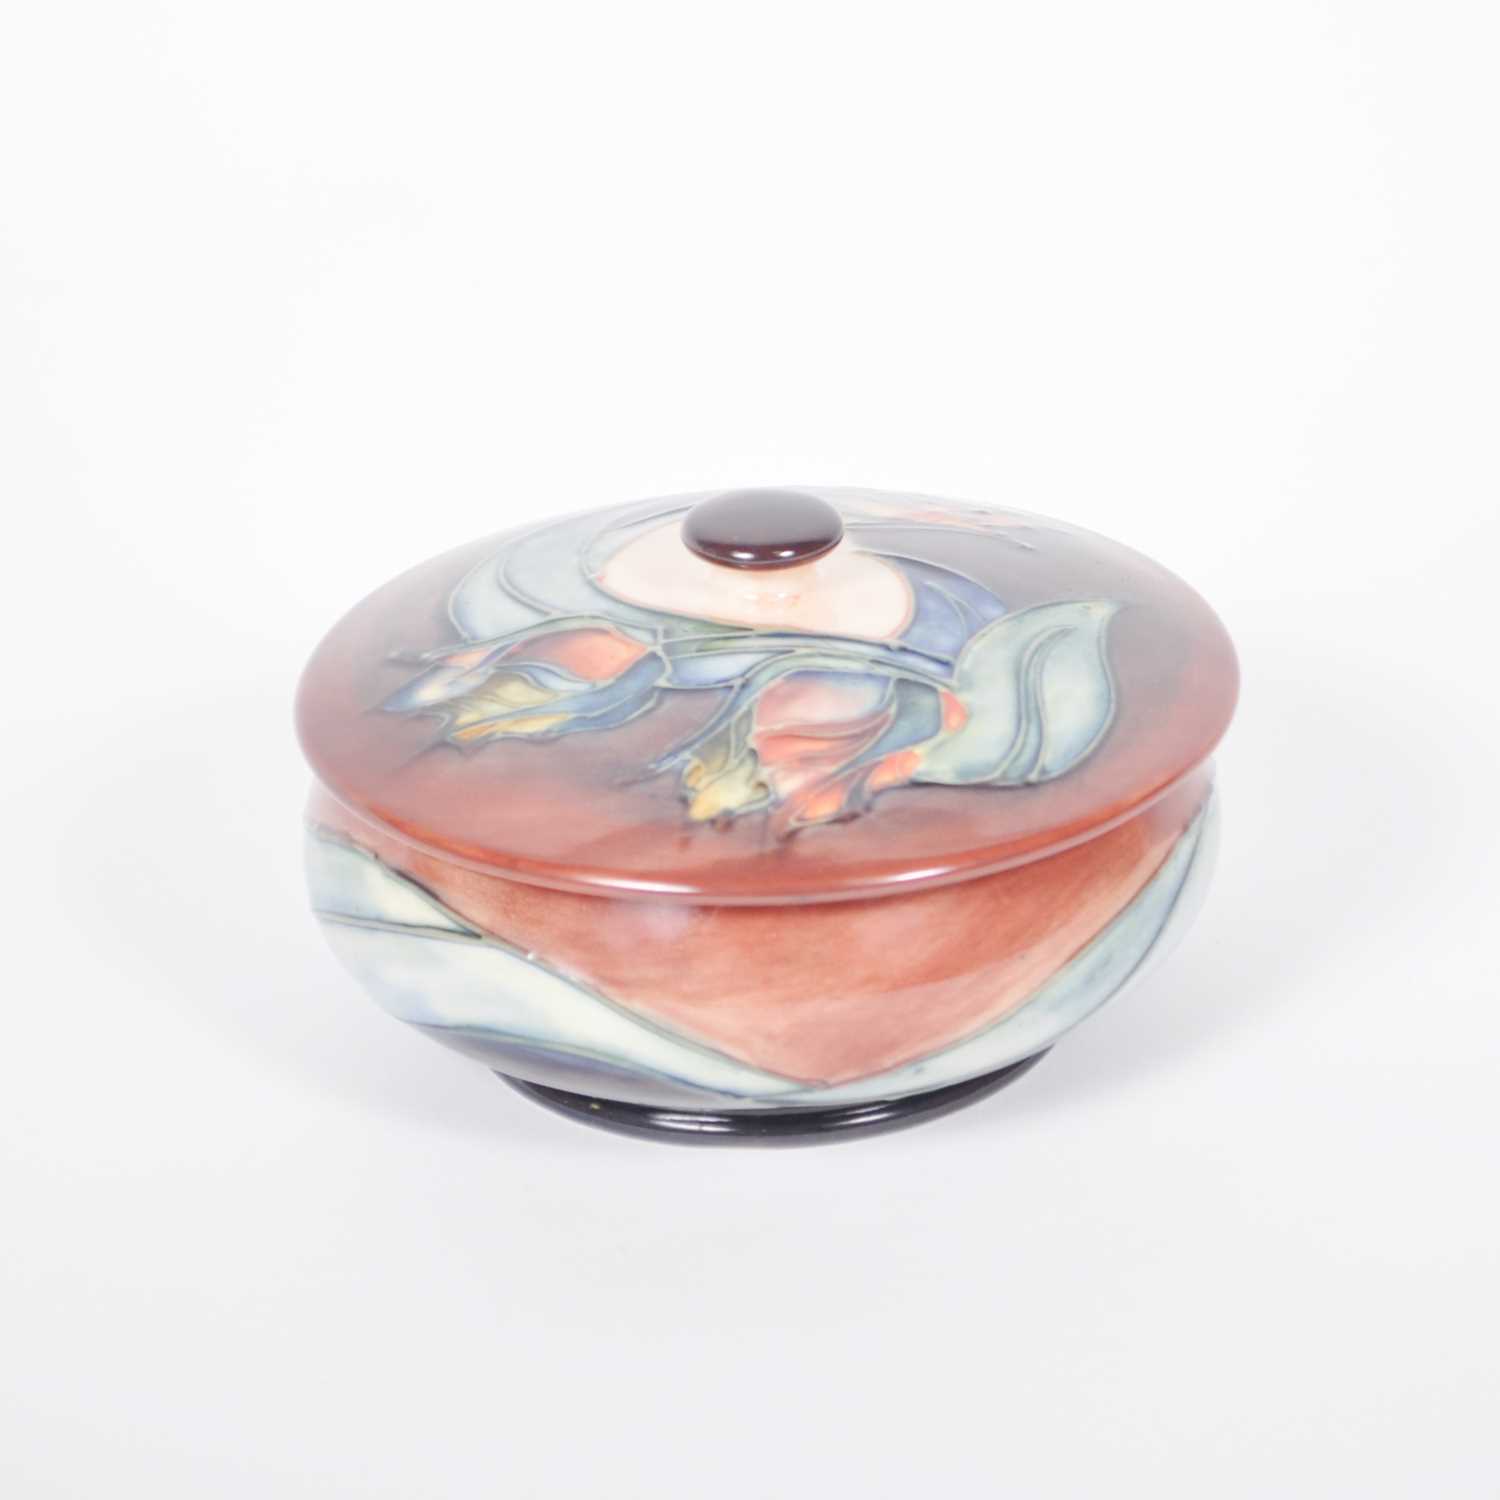 Lot 572 - A Moorcroft Pottery dish and cover, 'Red Tulip' designed by Sally Tuffin